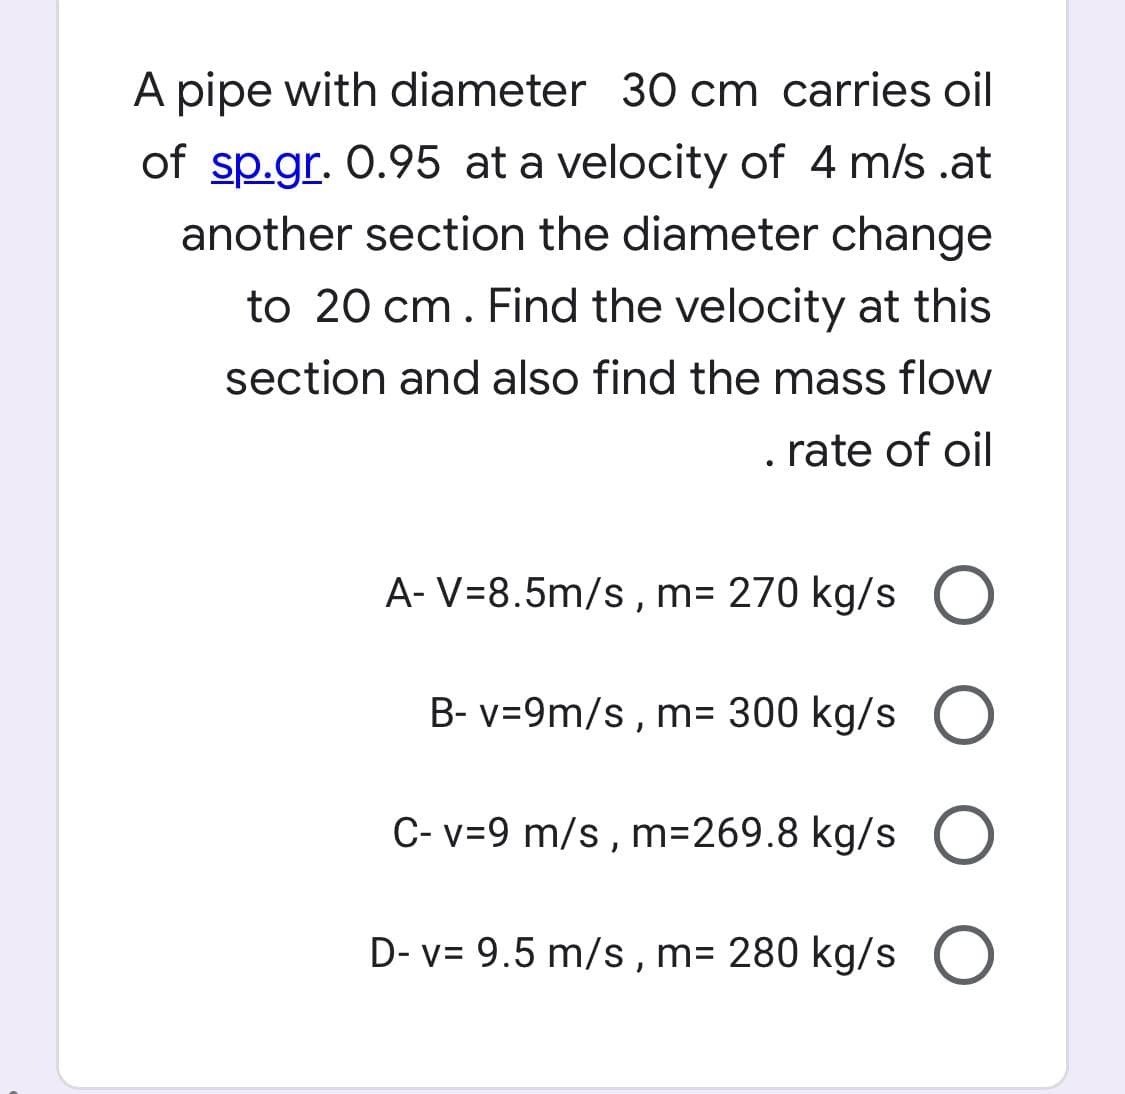 A pipe with diameter 30 cm carries oil
of sp.gr. 0.95 at a velocity of 4 m/s .at
another section the diameter change
to 20 cm. Find the velocity at this
section and also find the mass flow
. rate of oil
A- V=8.5m/s , m= 270 kg/s
B- v=9m/s, m= 300 kg/s O
C- v=9 m/s , m=269.8 kg/s
D- v= 9.5 m/s, m= 280 kg/s O
